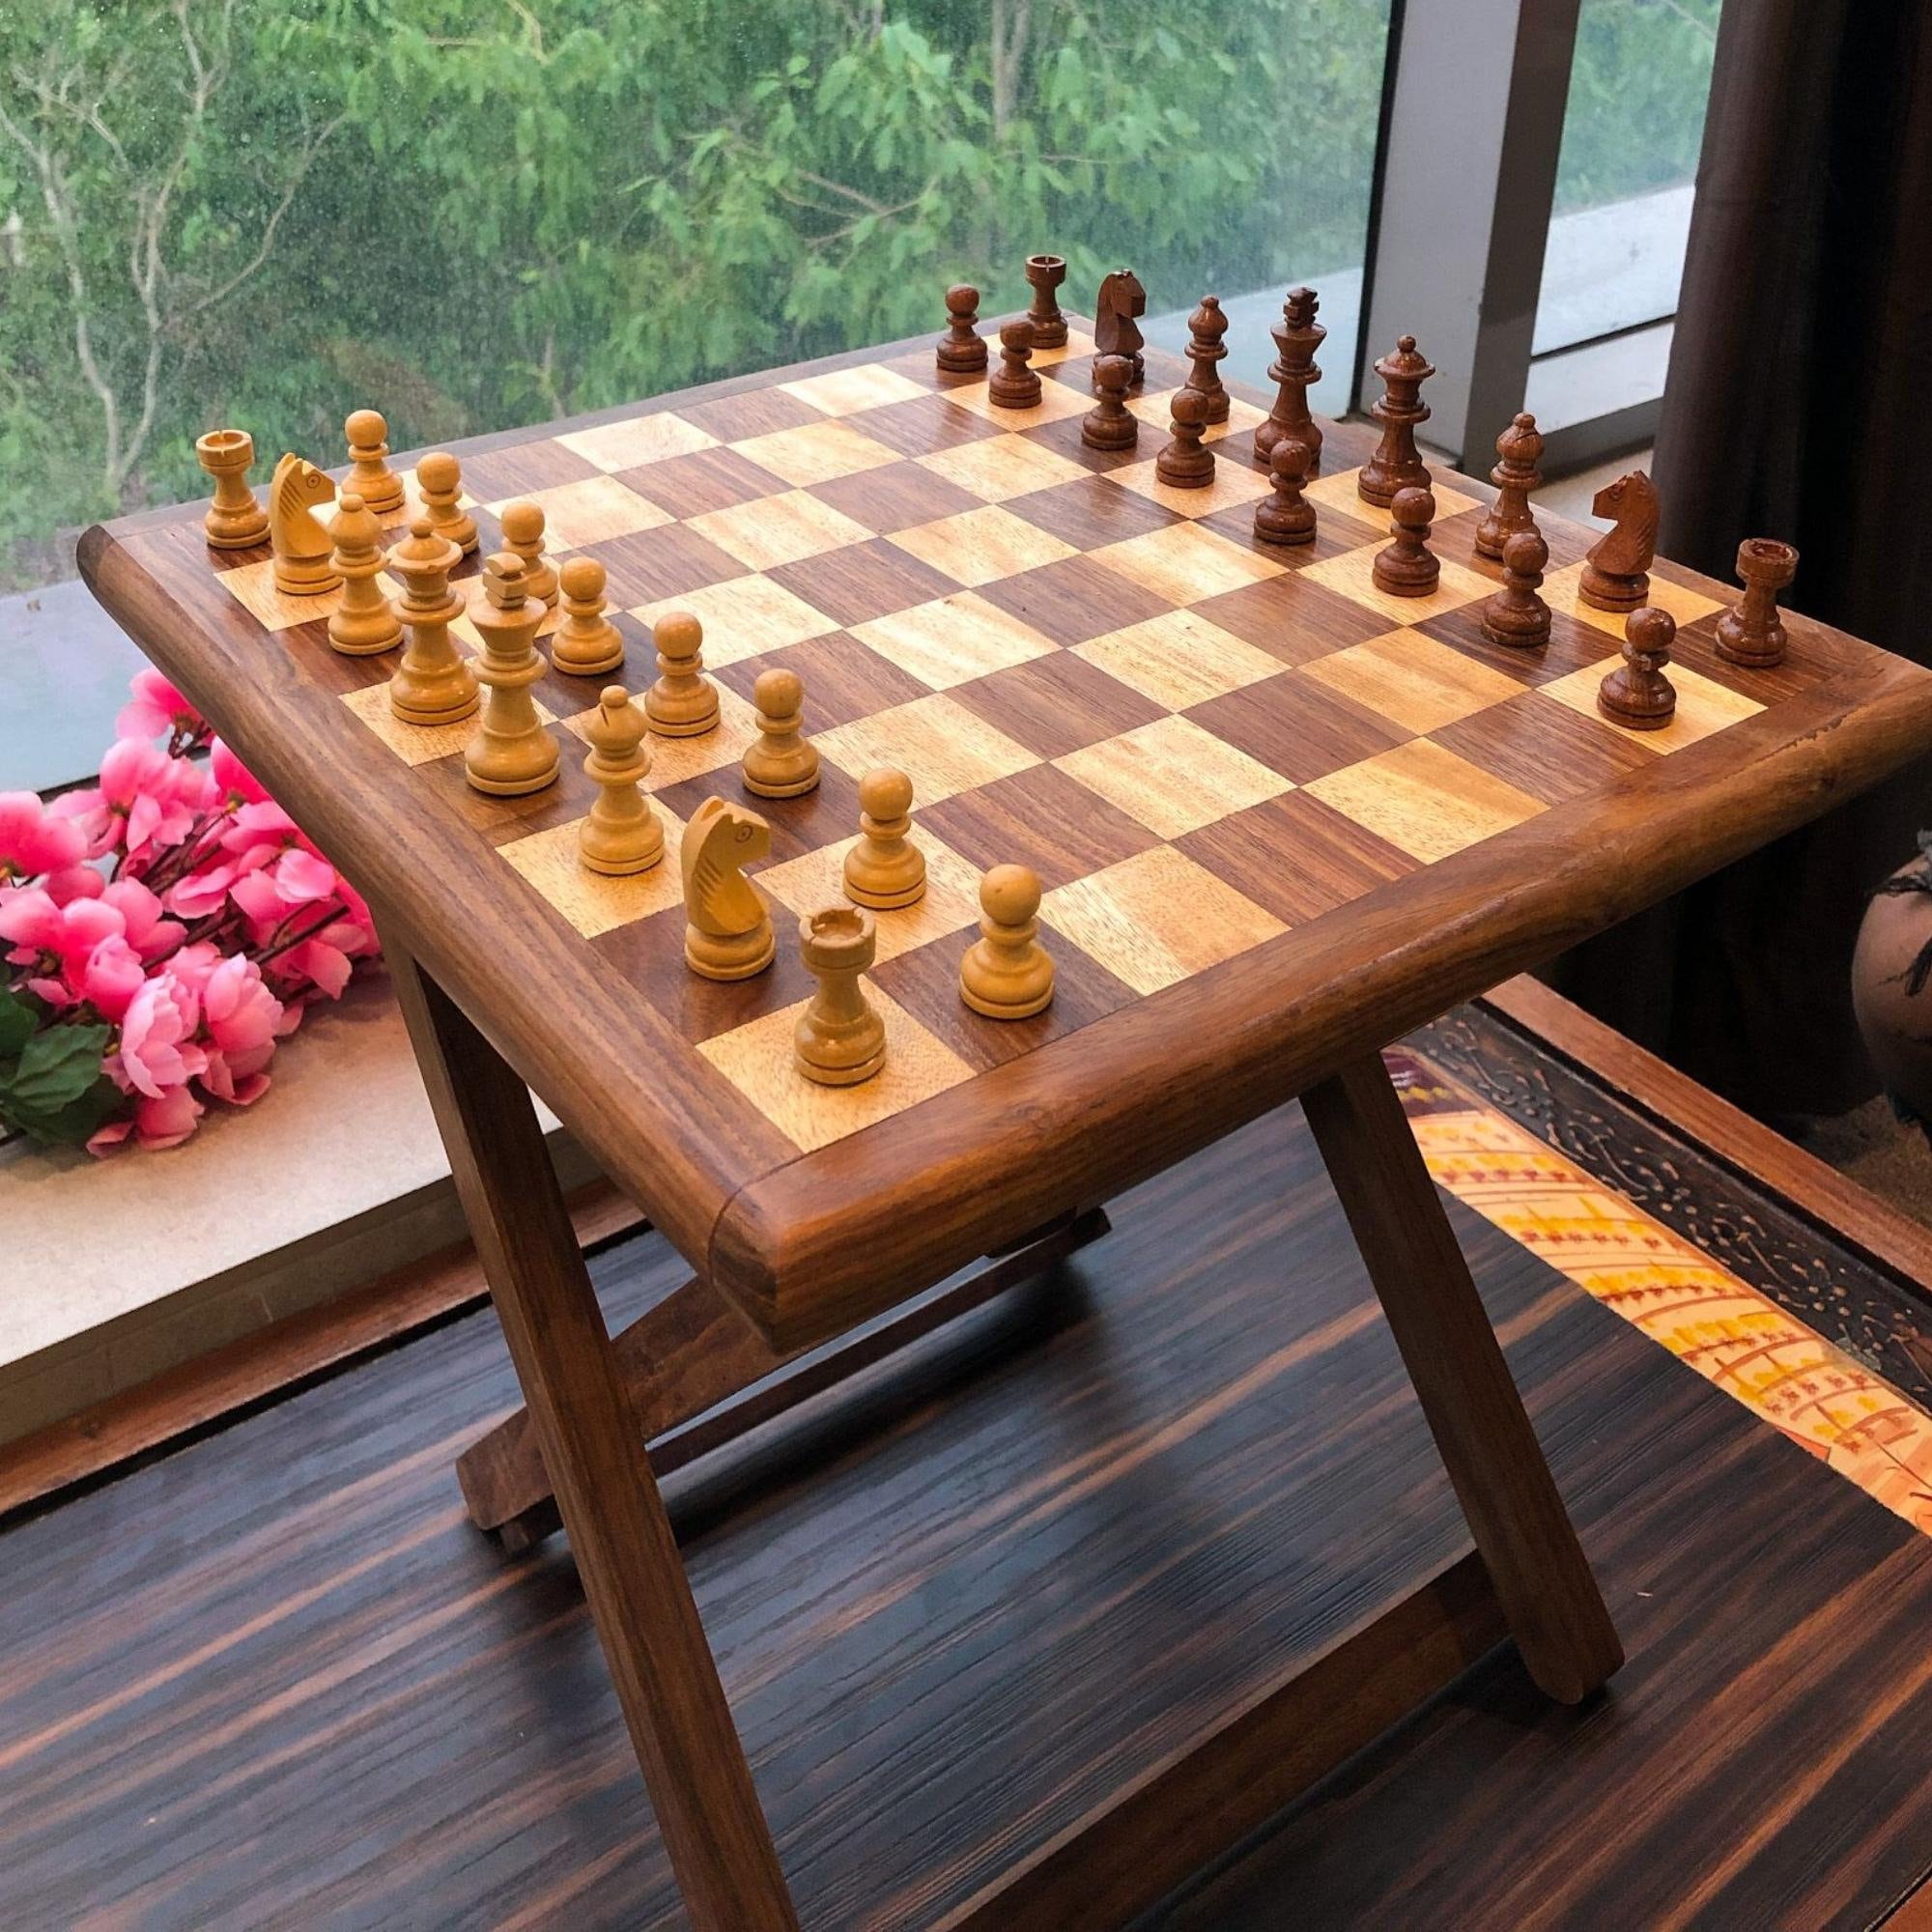 Table Professional Chess Big Official Wood Kit Game Luxury Family